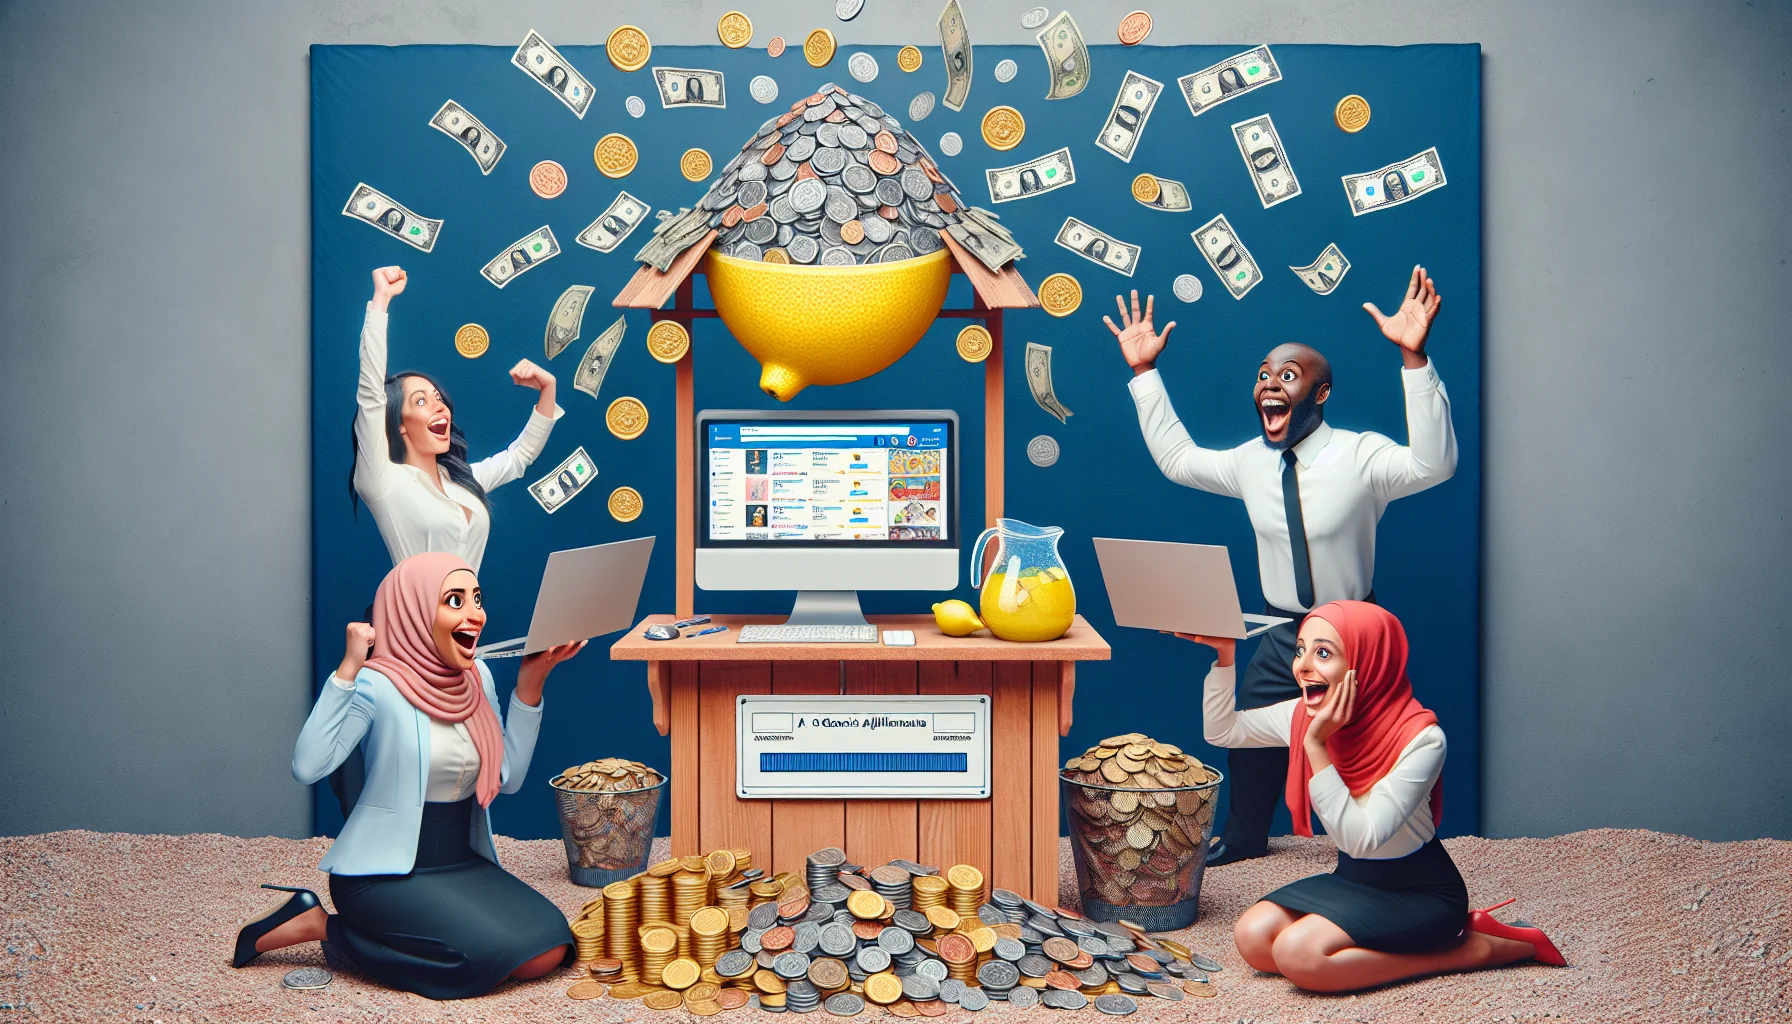 Visualize a humorous yet plausible scene that represents a metaphorical interpretation of participating in a generic affiliate marketing program, relating to the concept of online earnings. Picture a traditional lemonade stand, but instead of selling lemonade, it's promoting a variety of unseen online products. Coins and bills are materializing from the computer screens as if the sales were tangible. There are two highly excited individuals, one Middle-Eastern female and one Black male, managing this surreal setup. They are thrilled to see the physical representation of their online earnings and dance with each other in their joyous victory.